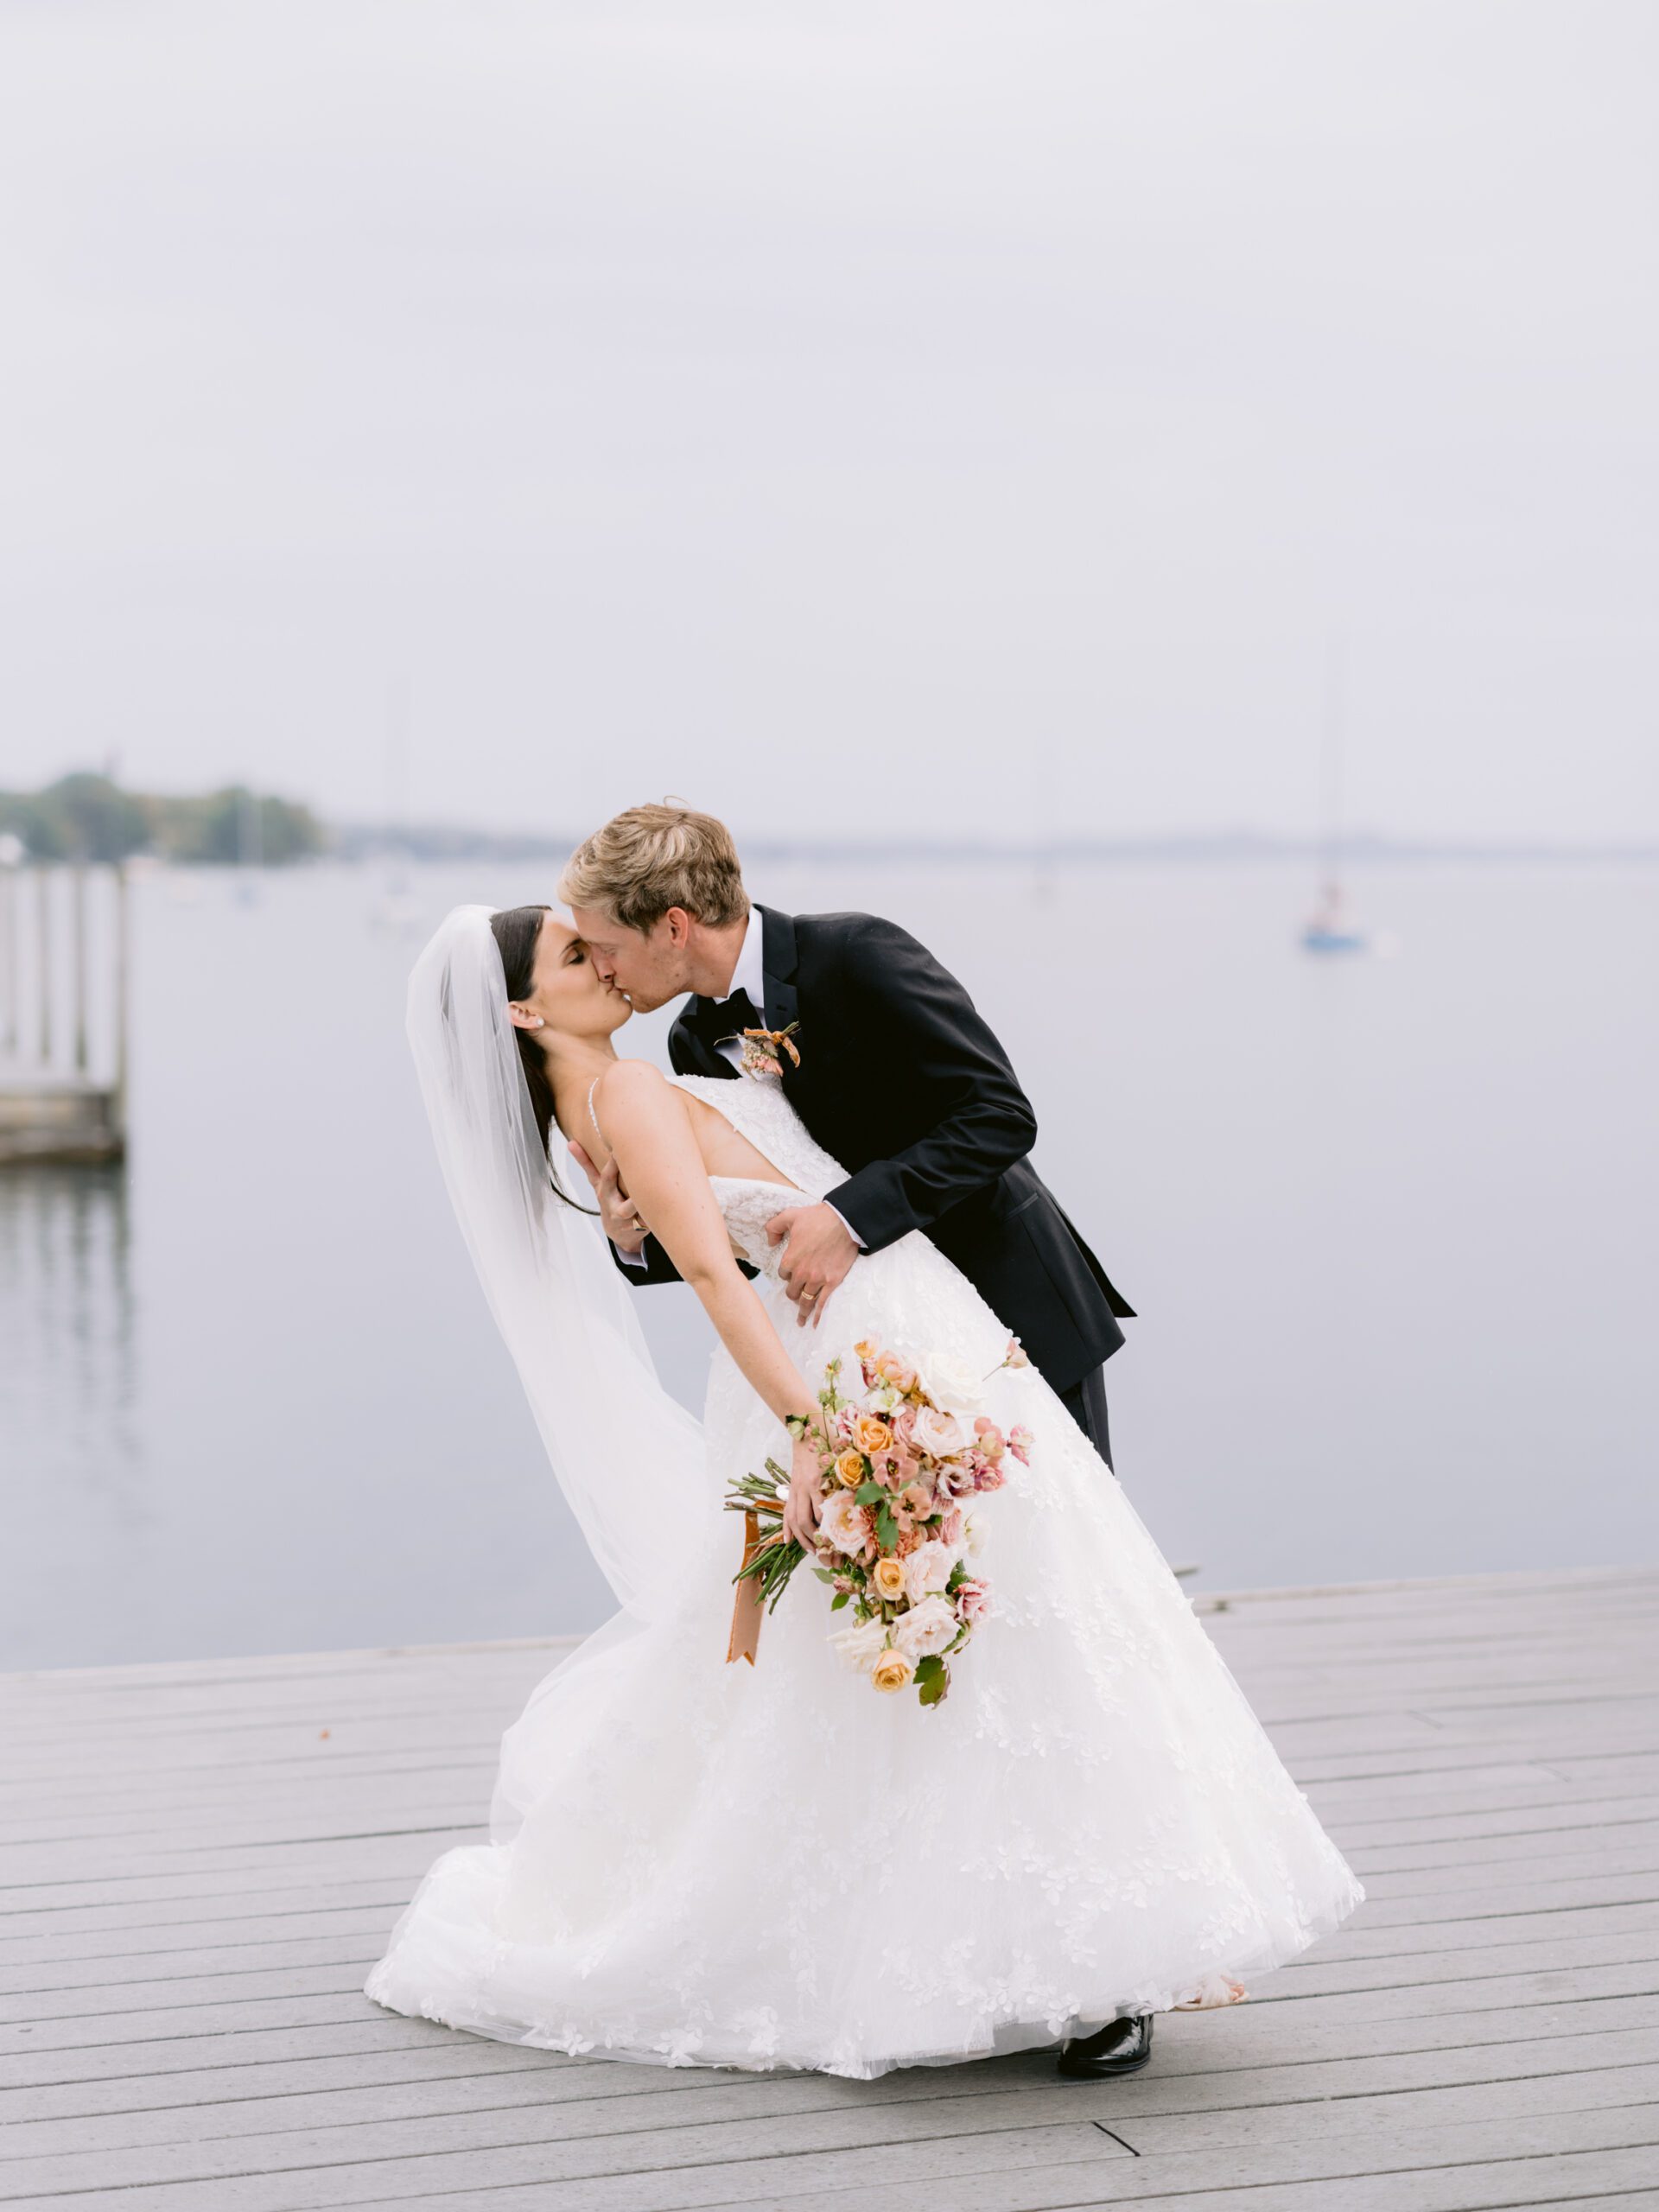 A bride and groom kiss on a dock in Northern Michigan in front of sailboats